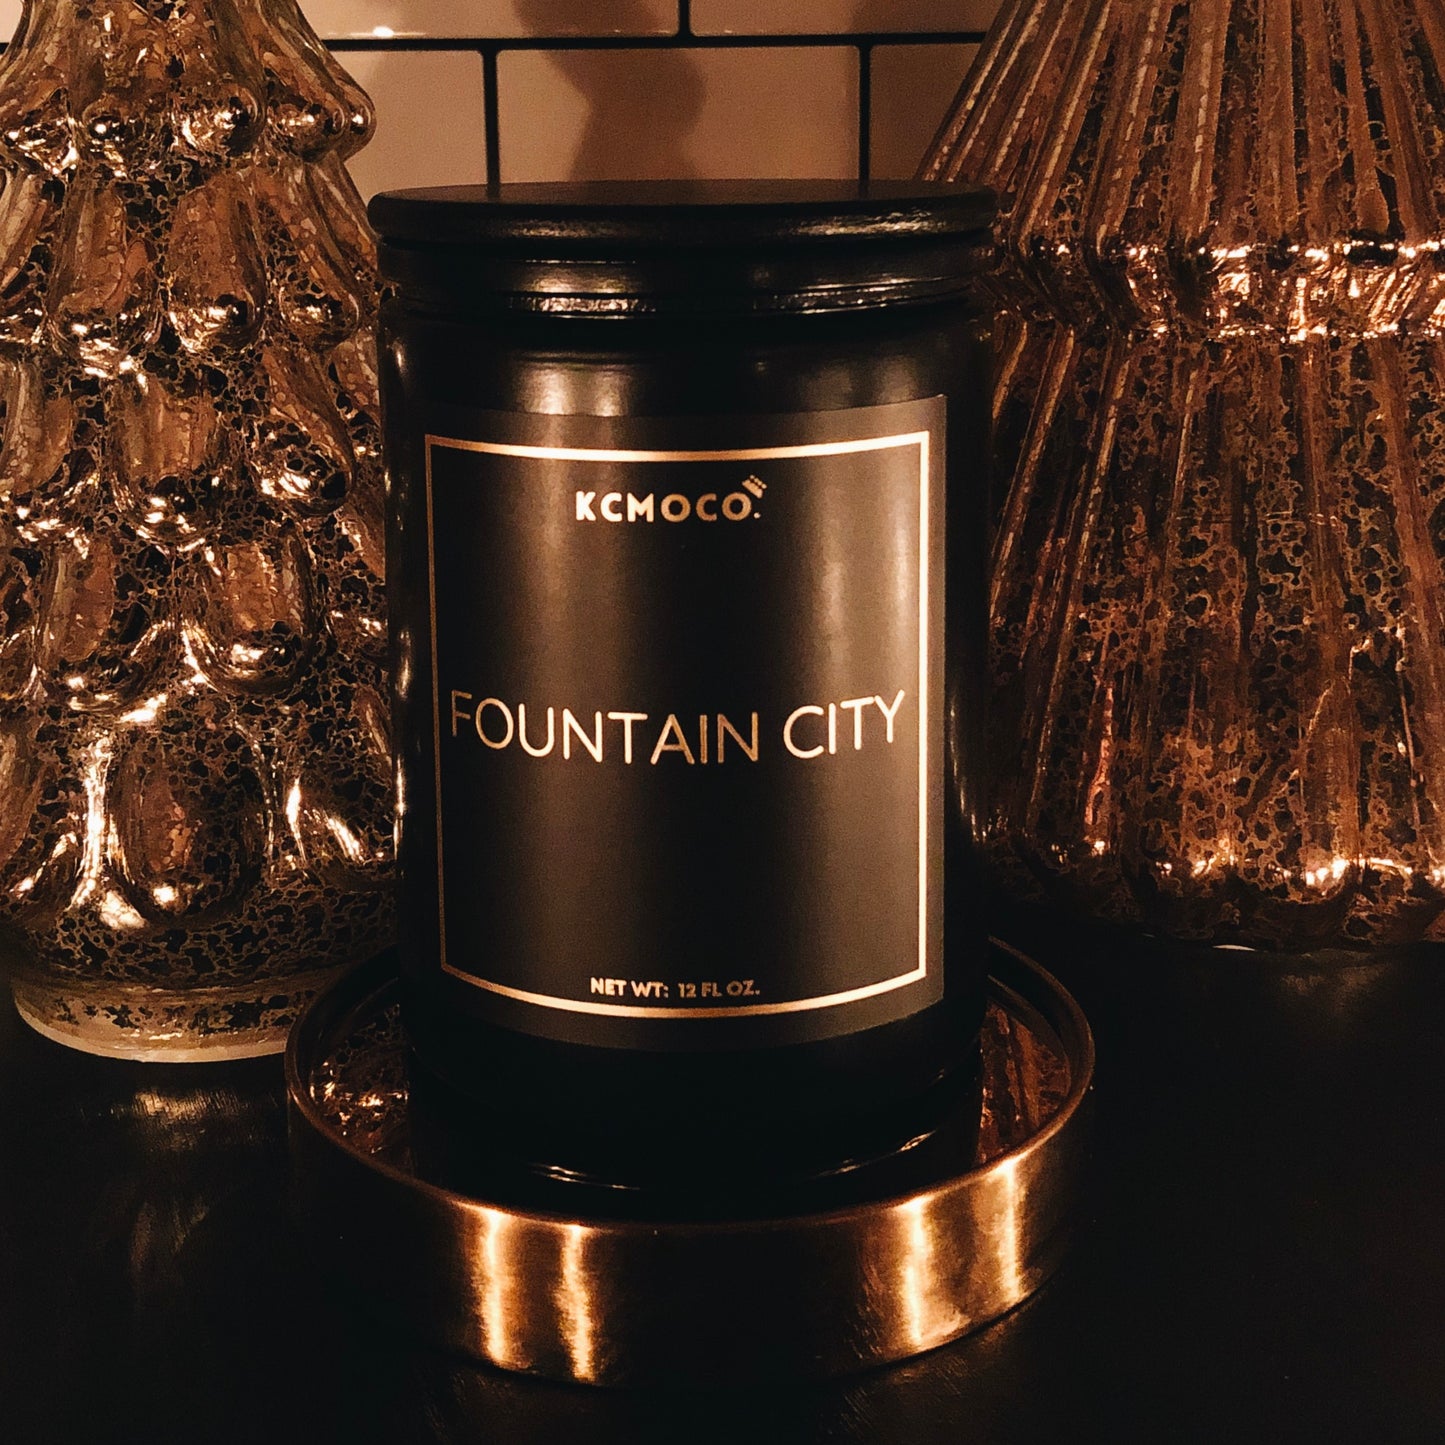 KCMOCO. candles City Market Candle in Classic Collection Jar: Black glass jar with gold foil label reading "KCMOCO. Fountain City", with black bamboo lid, environmental photo  against backdrop of gold Christmas trees.